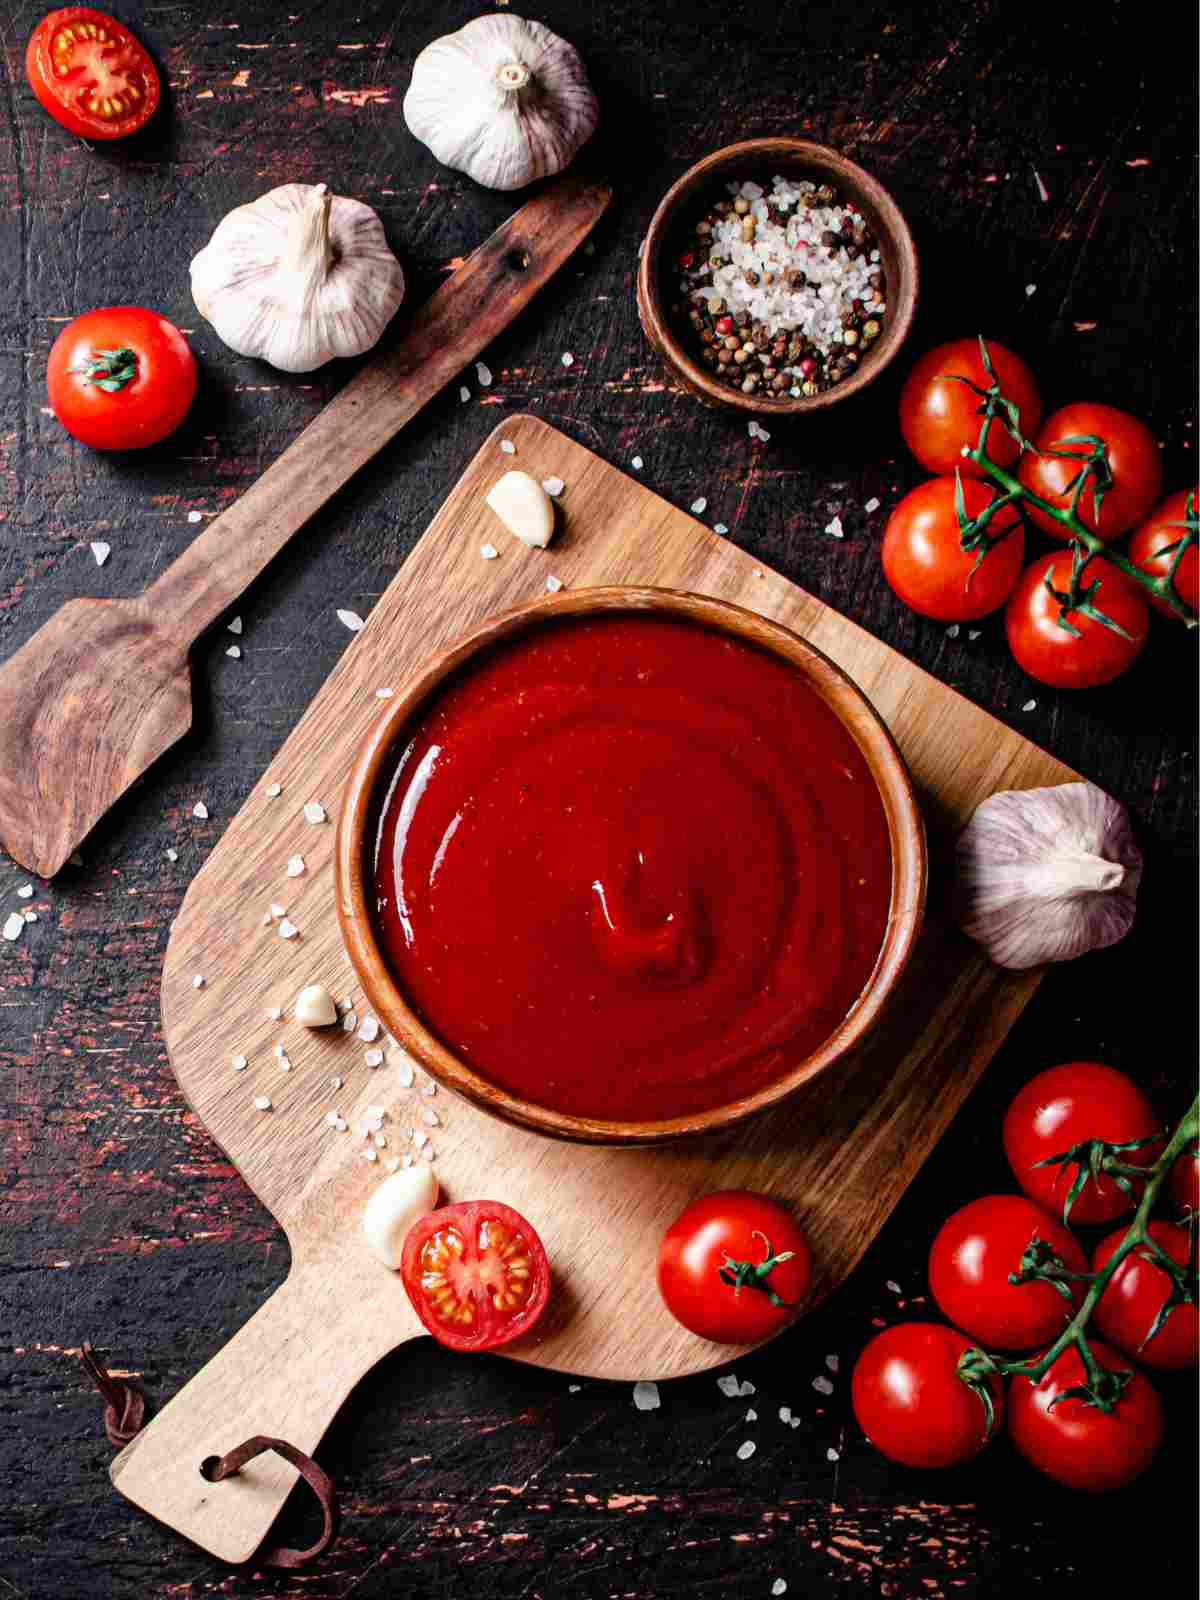 History and origins of tomato sauce and tomato paste